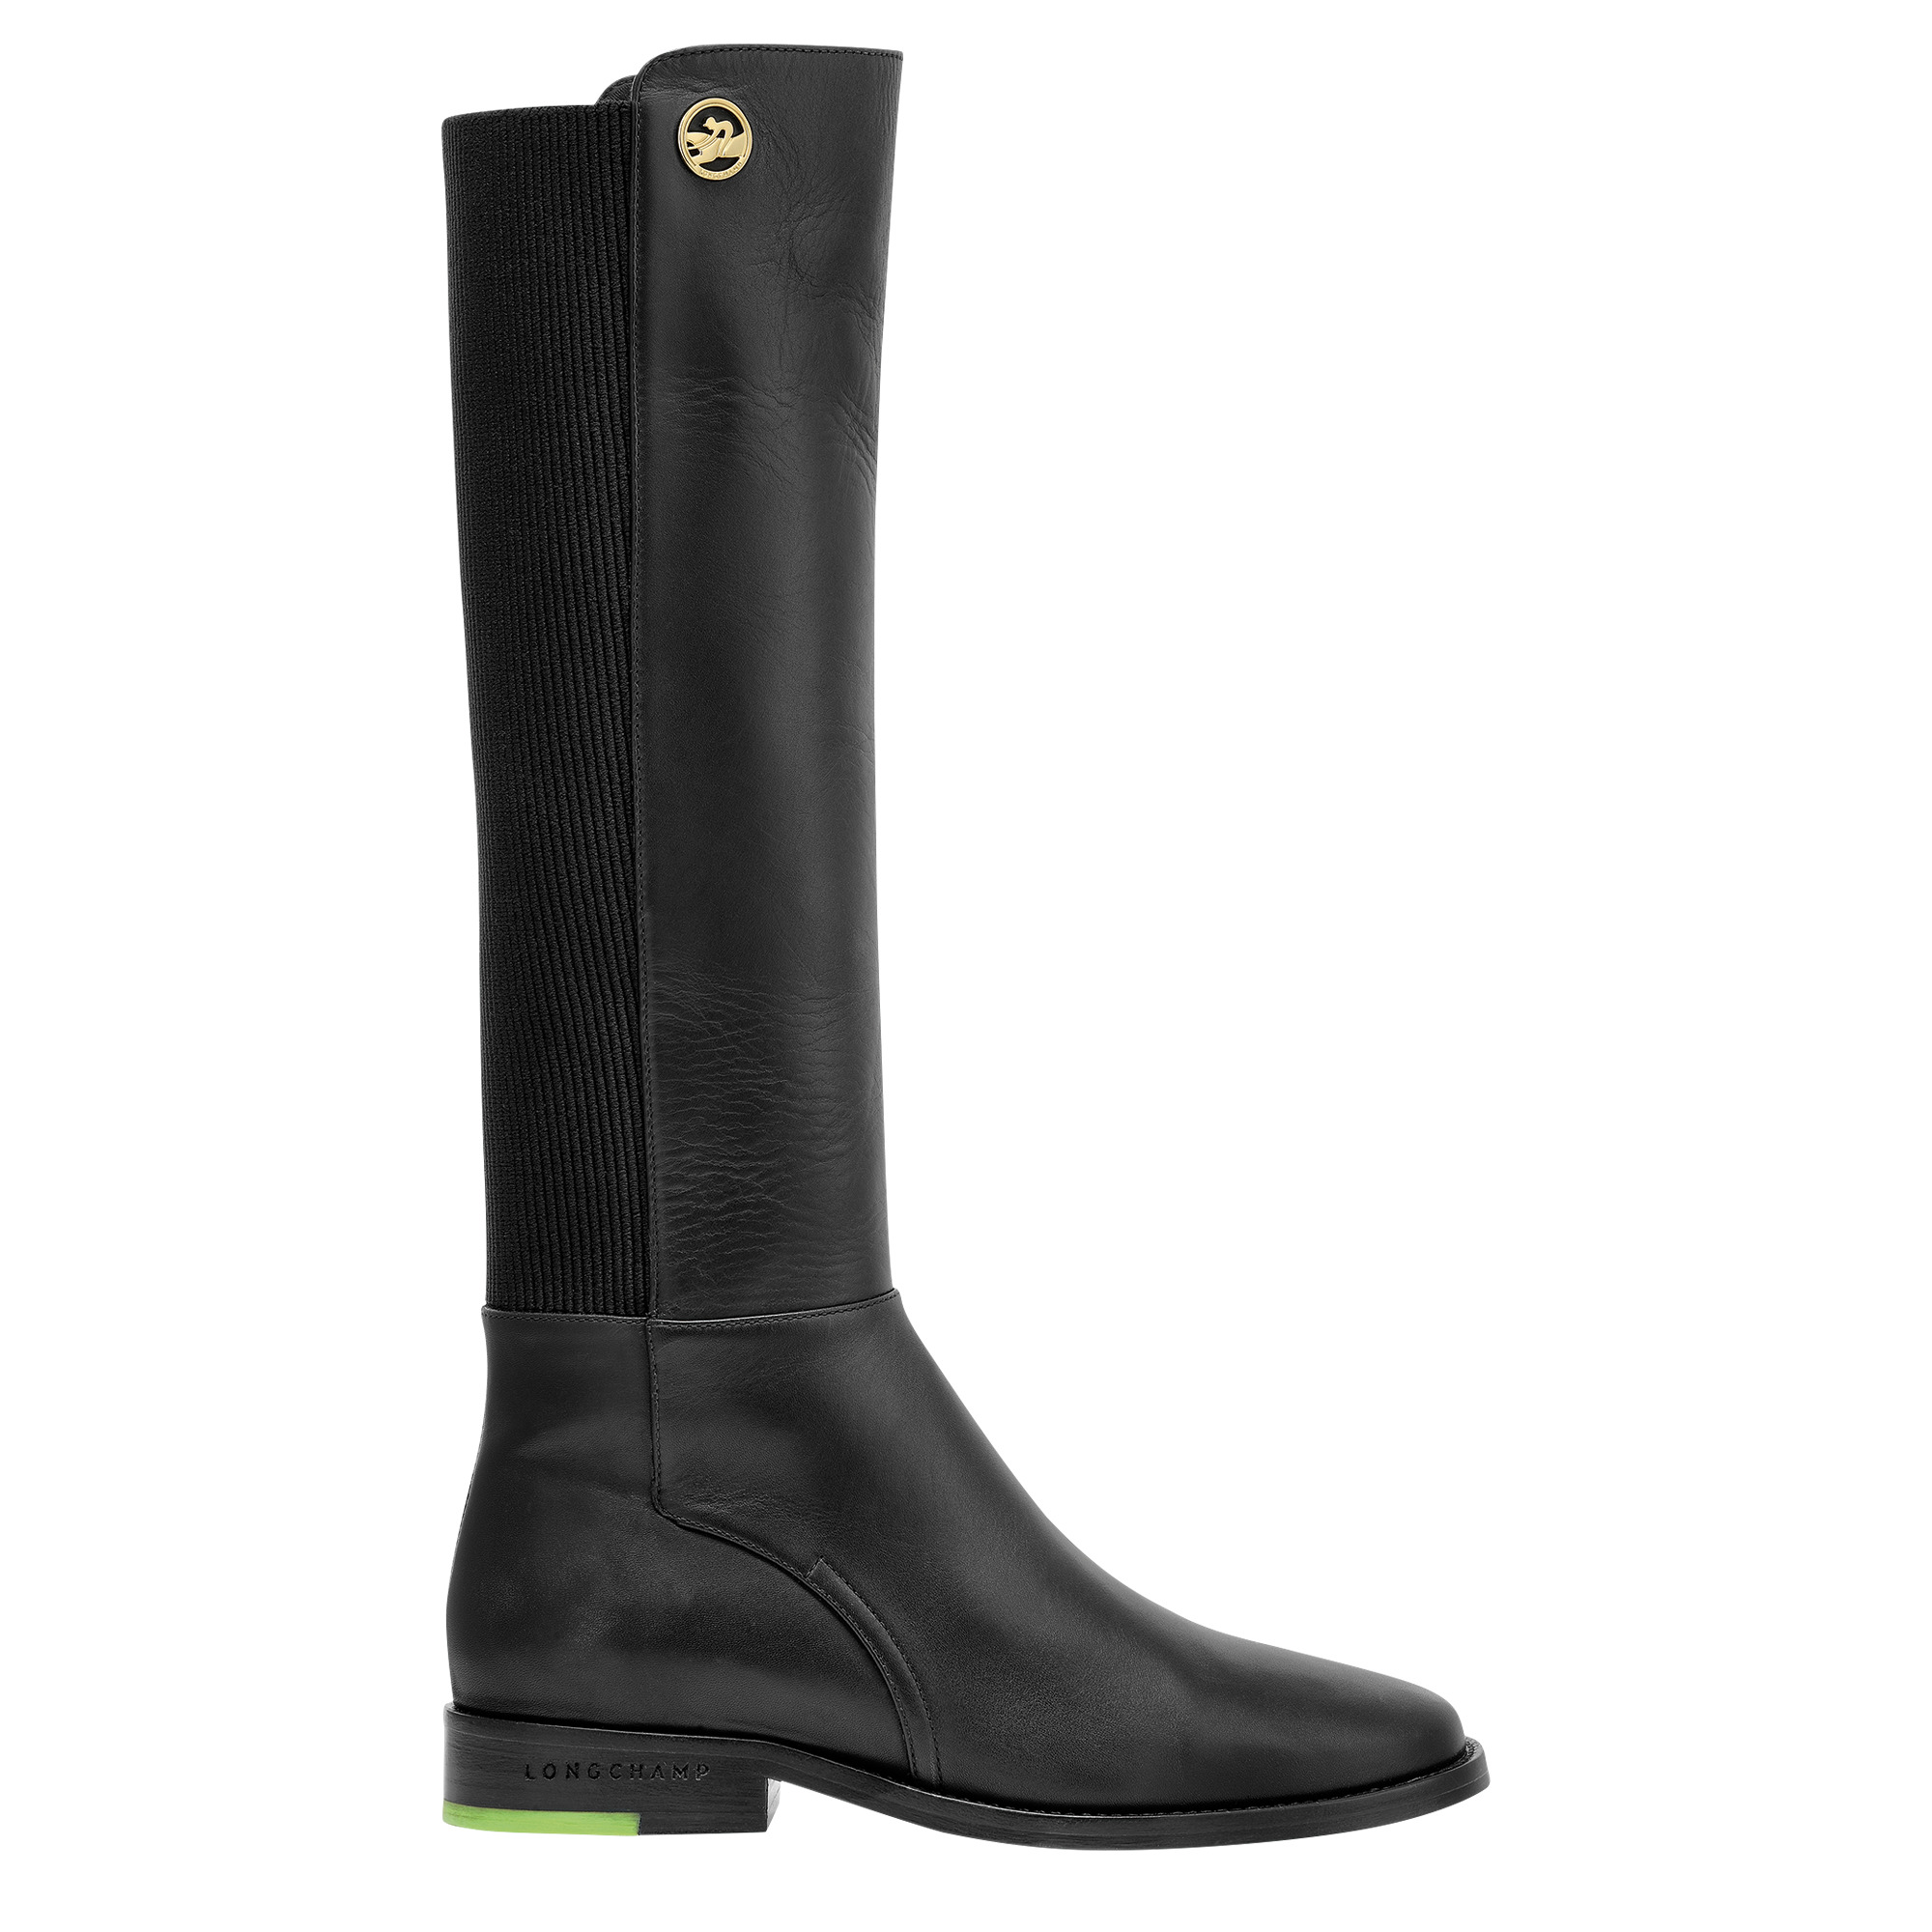 Box-trot Riding boots Black - Leather - 1